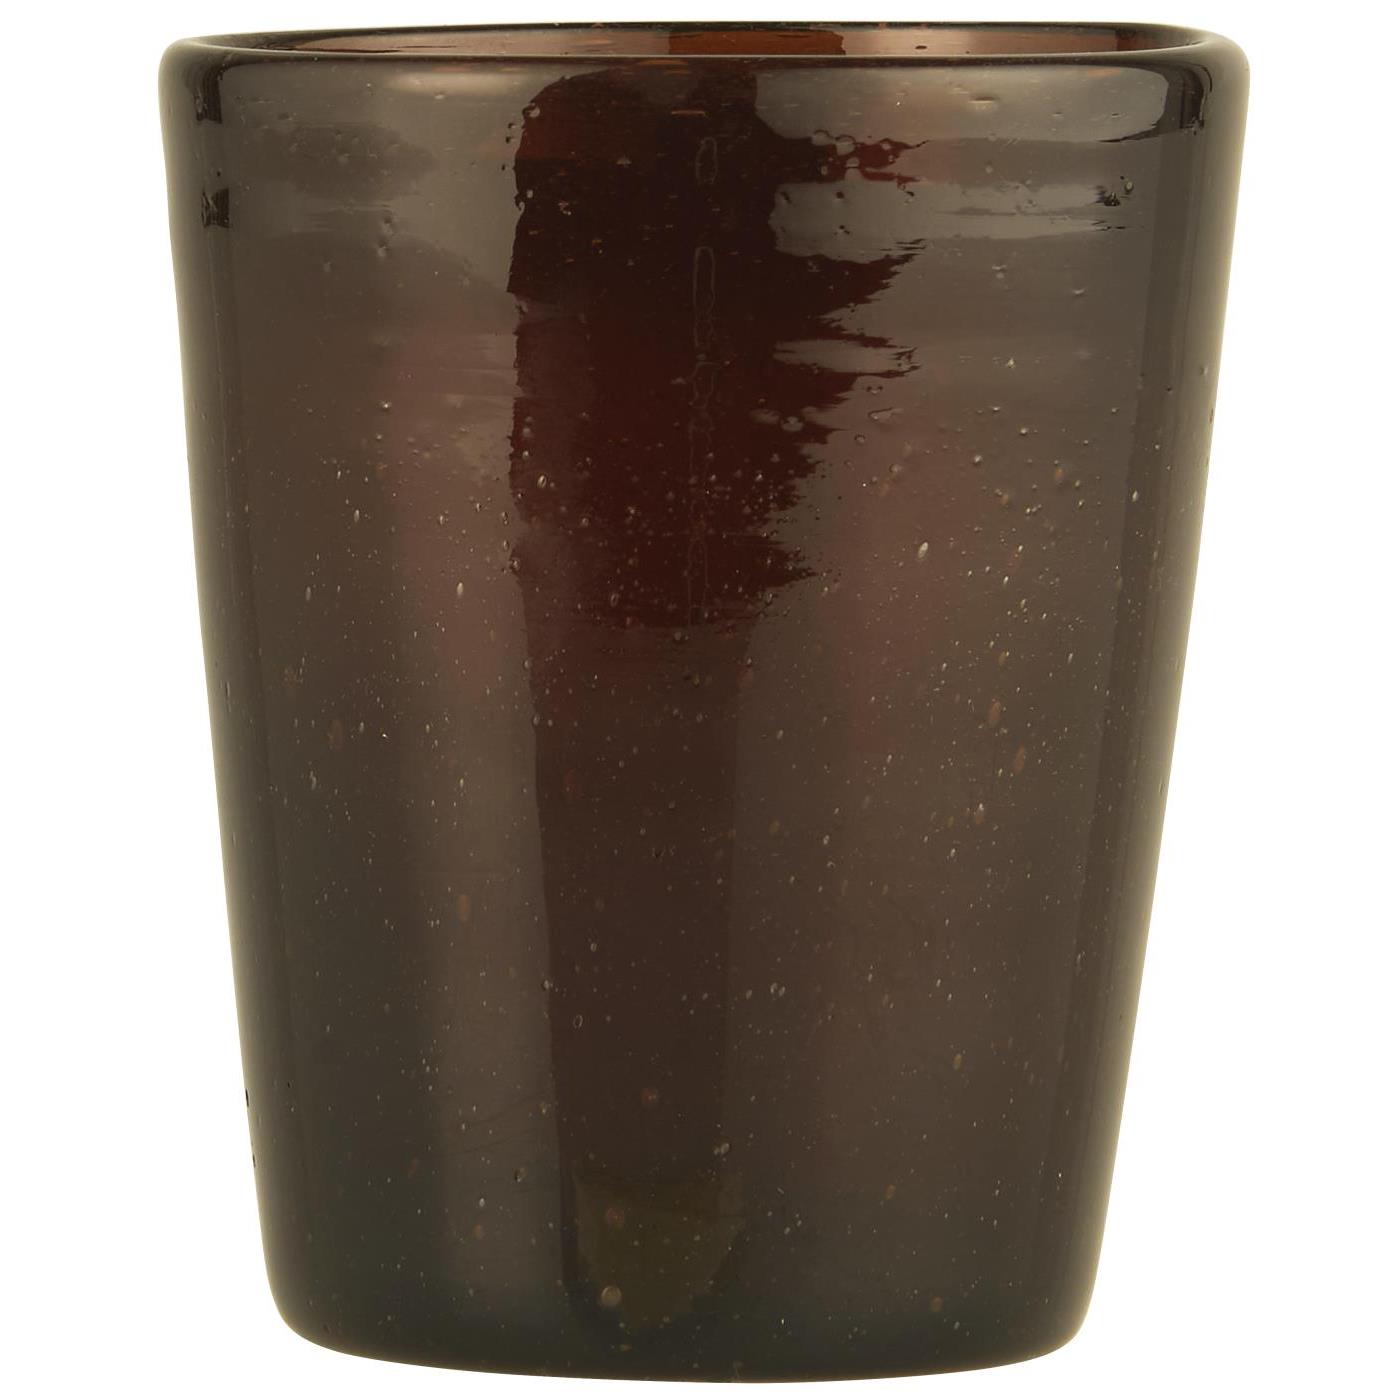 Water glass - Thick glass